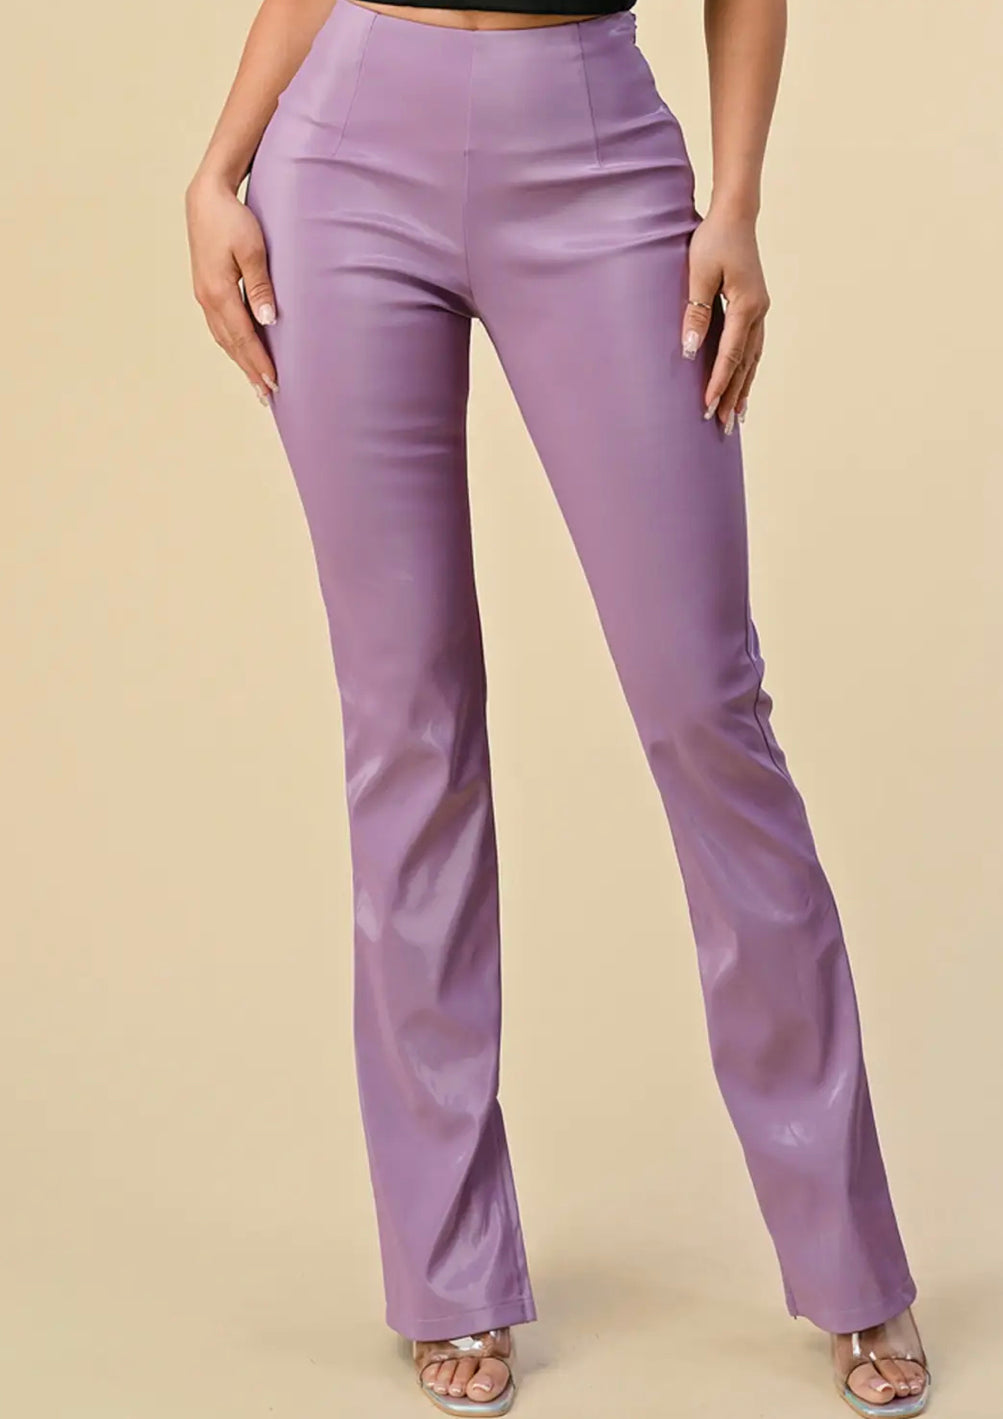 Lovely Lilac Faux Leather Pants